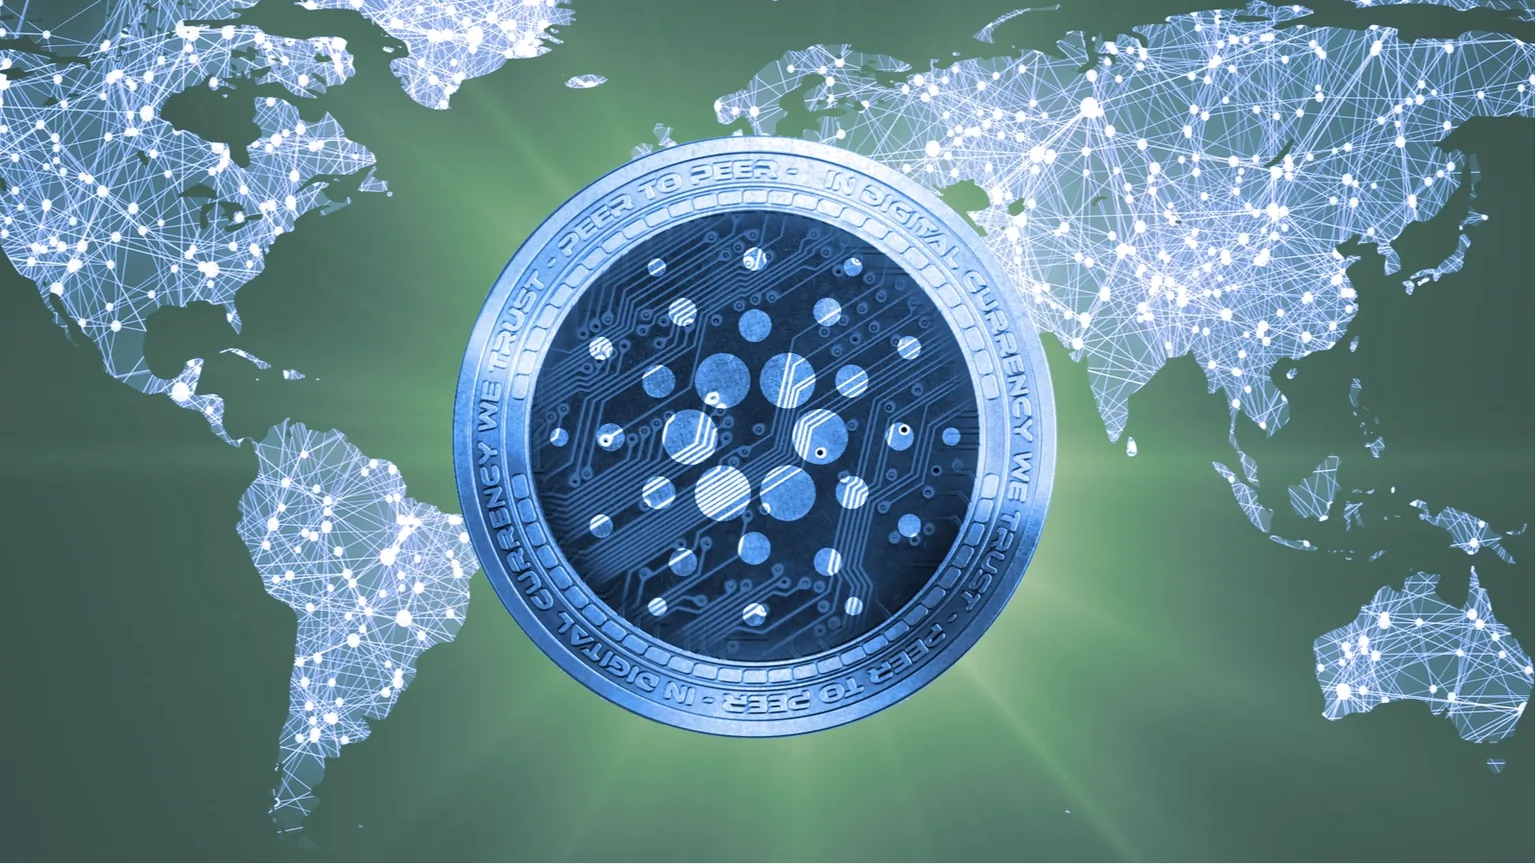 Cardano's price is up in recent days (Image: Shutterstock)